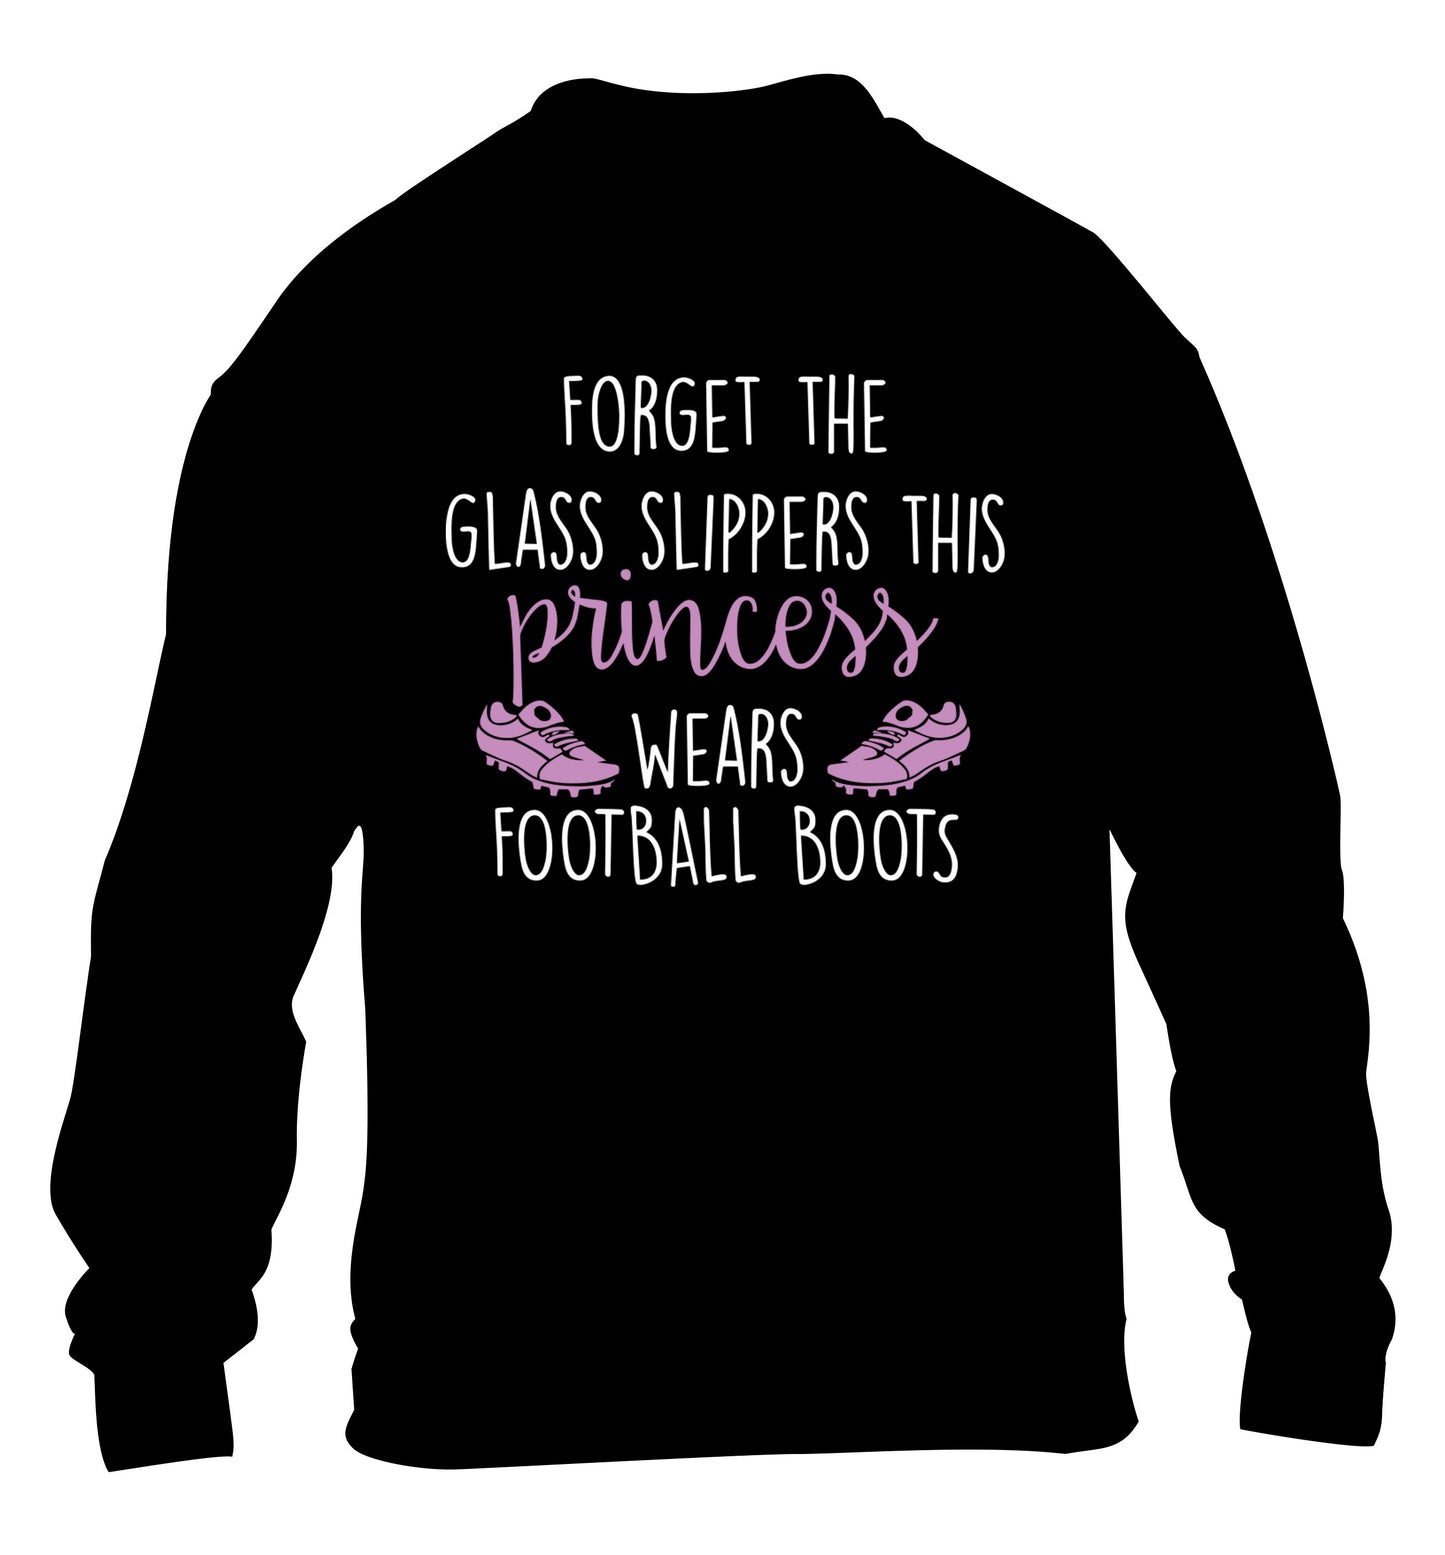 Forget the glass slippers this princess wears football boots children's black sweater 12-14 Years